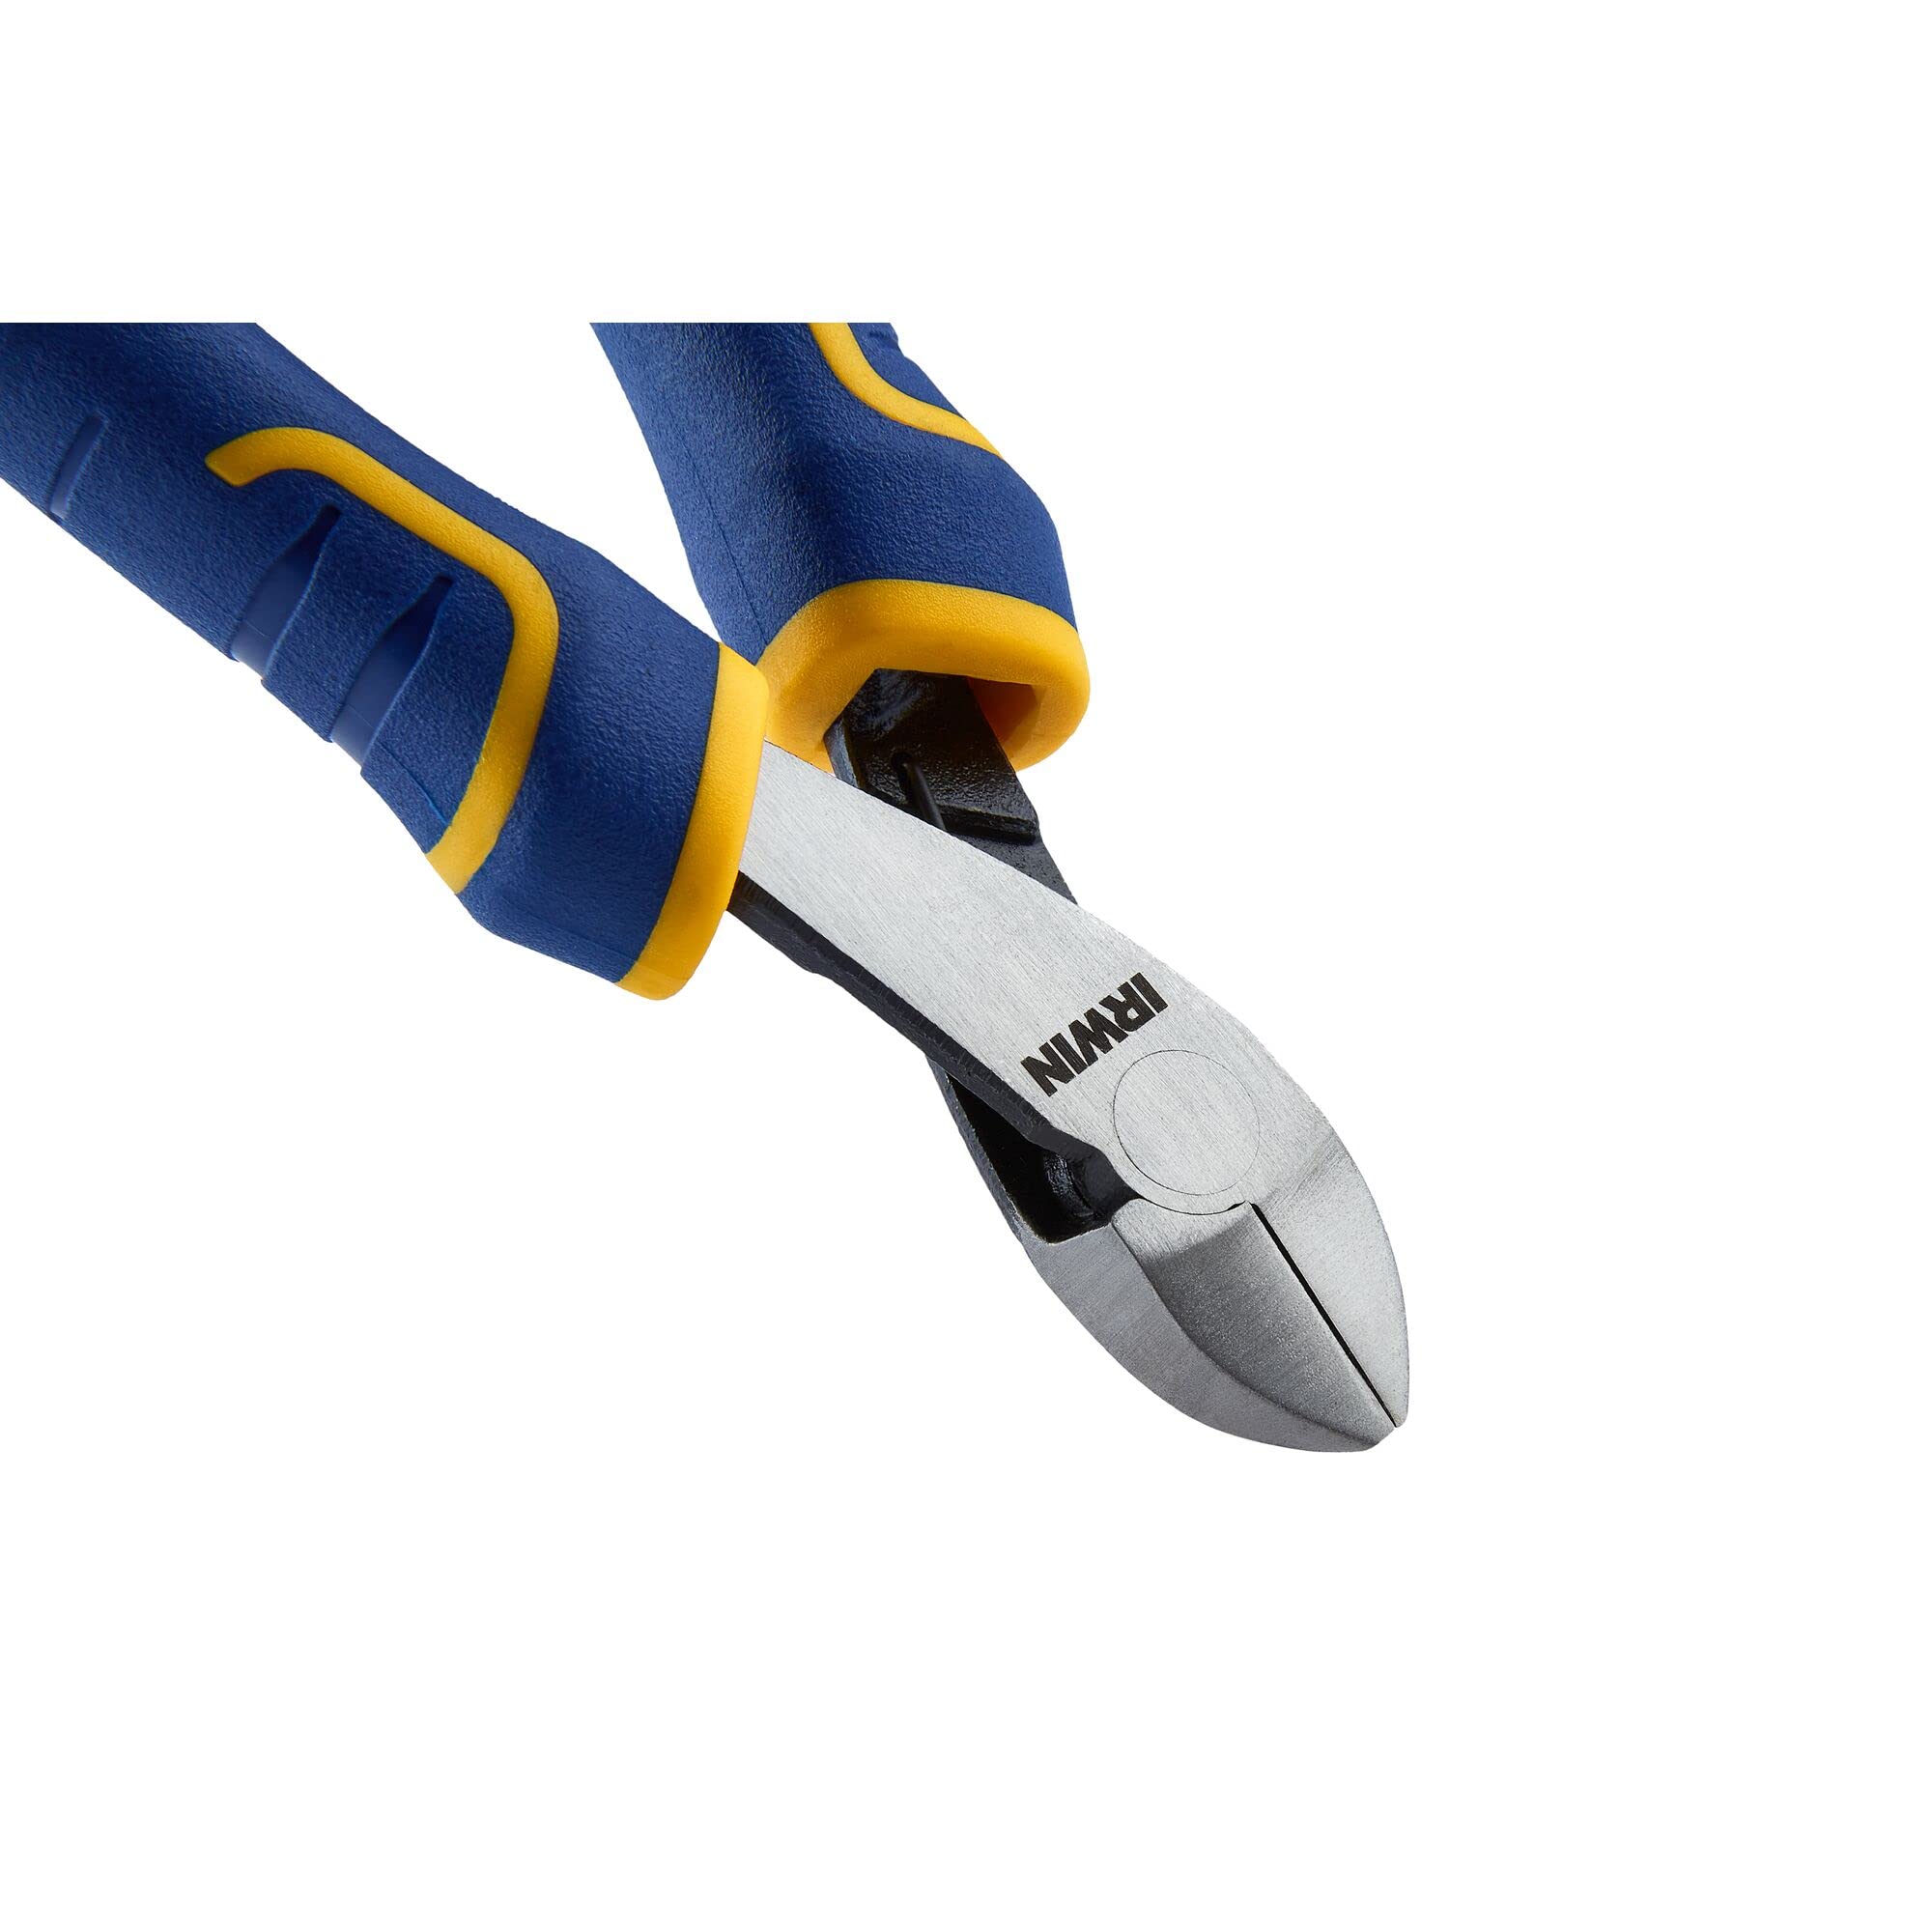 IRWIN VISE-GRIP Pliers with Spring, Flush Cut, Diagonal, 4-1/2-inch (2078925)